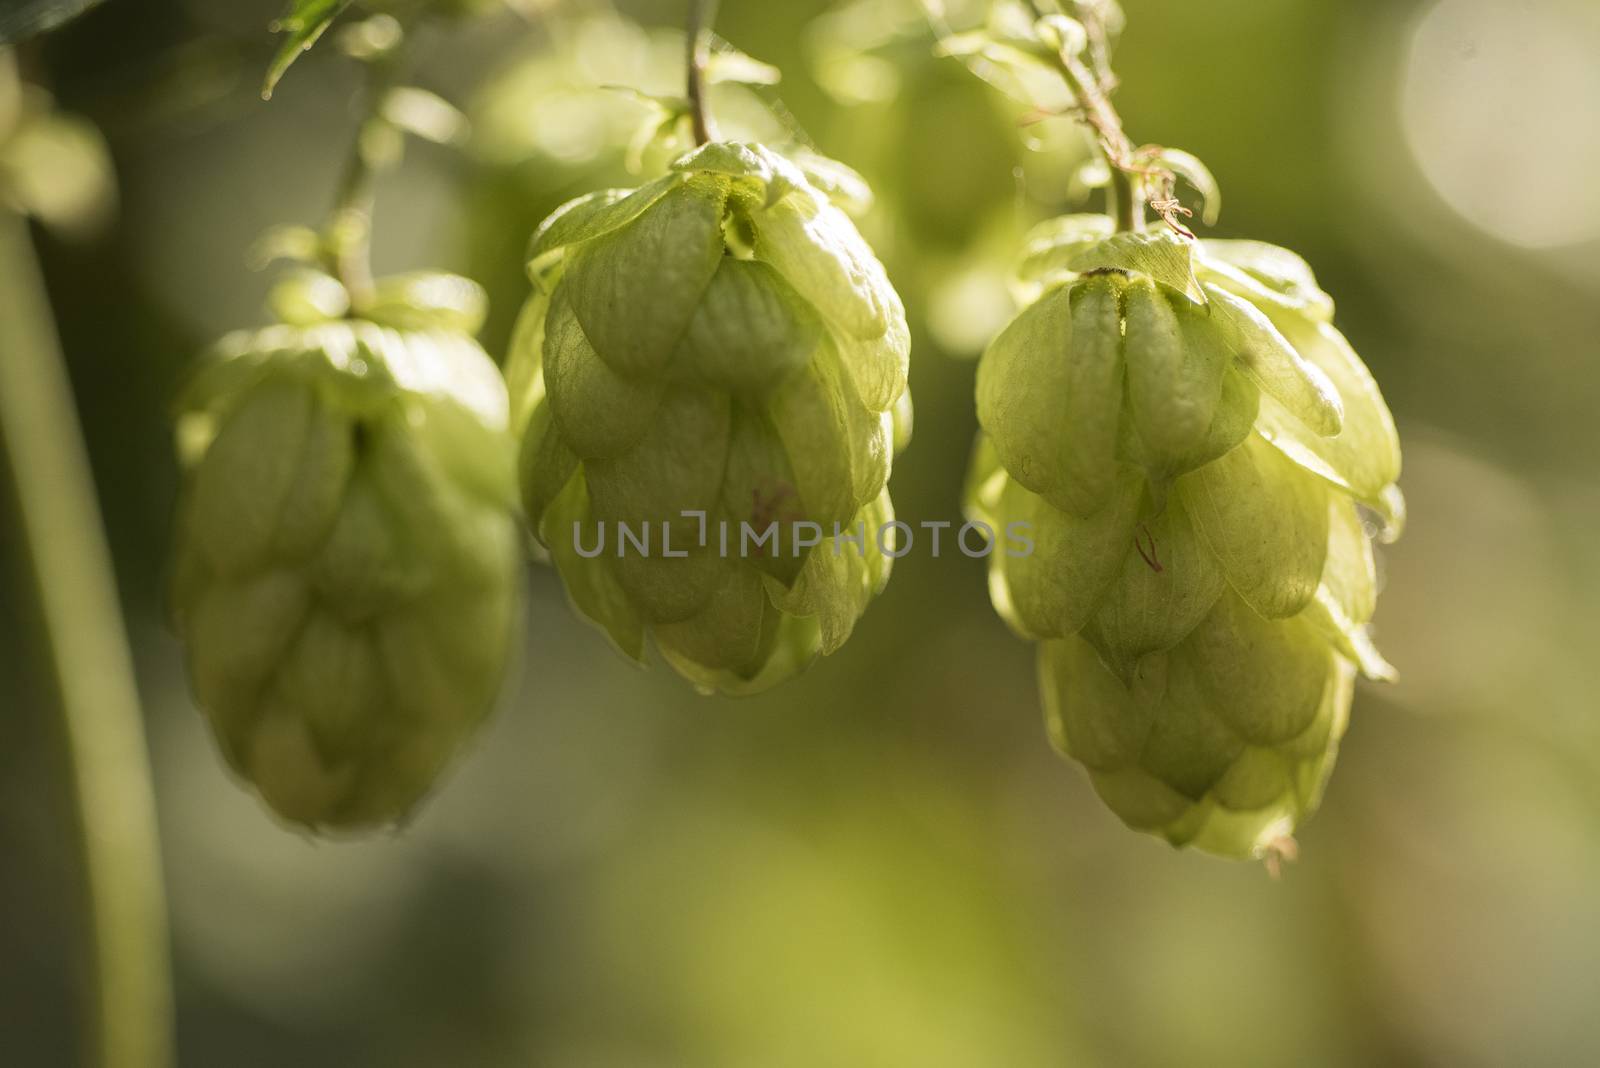 Cones of common hop (Humulus lupulus). anxiety, insomnia and oth by jalonsohu@gmail.com